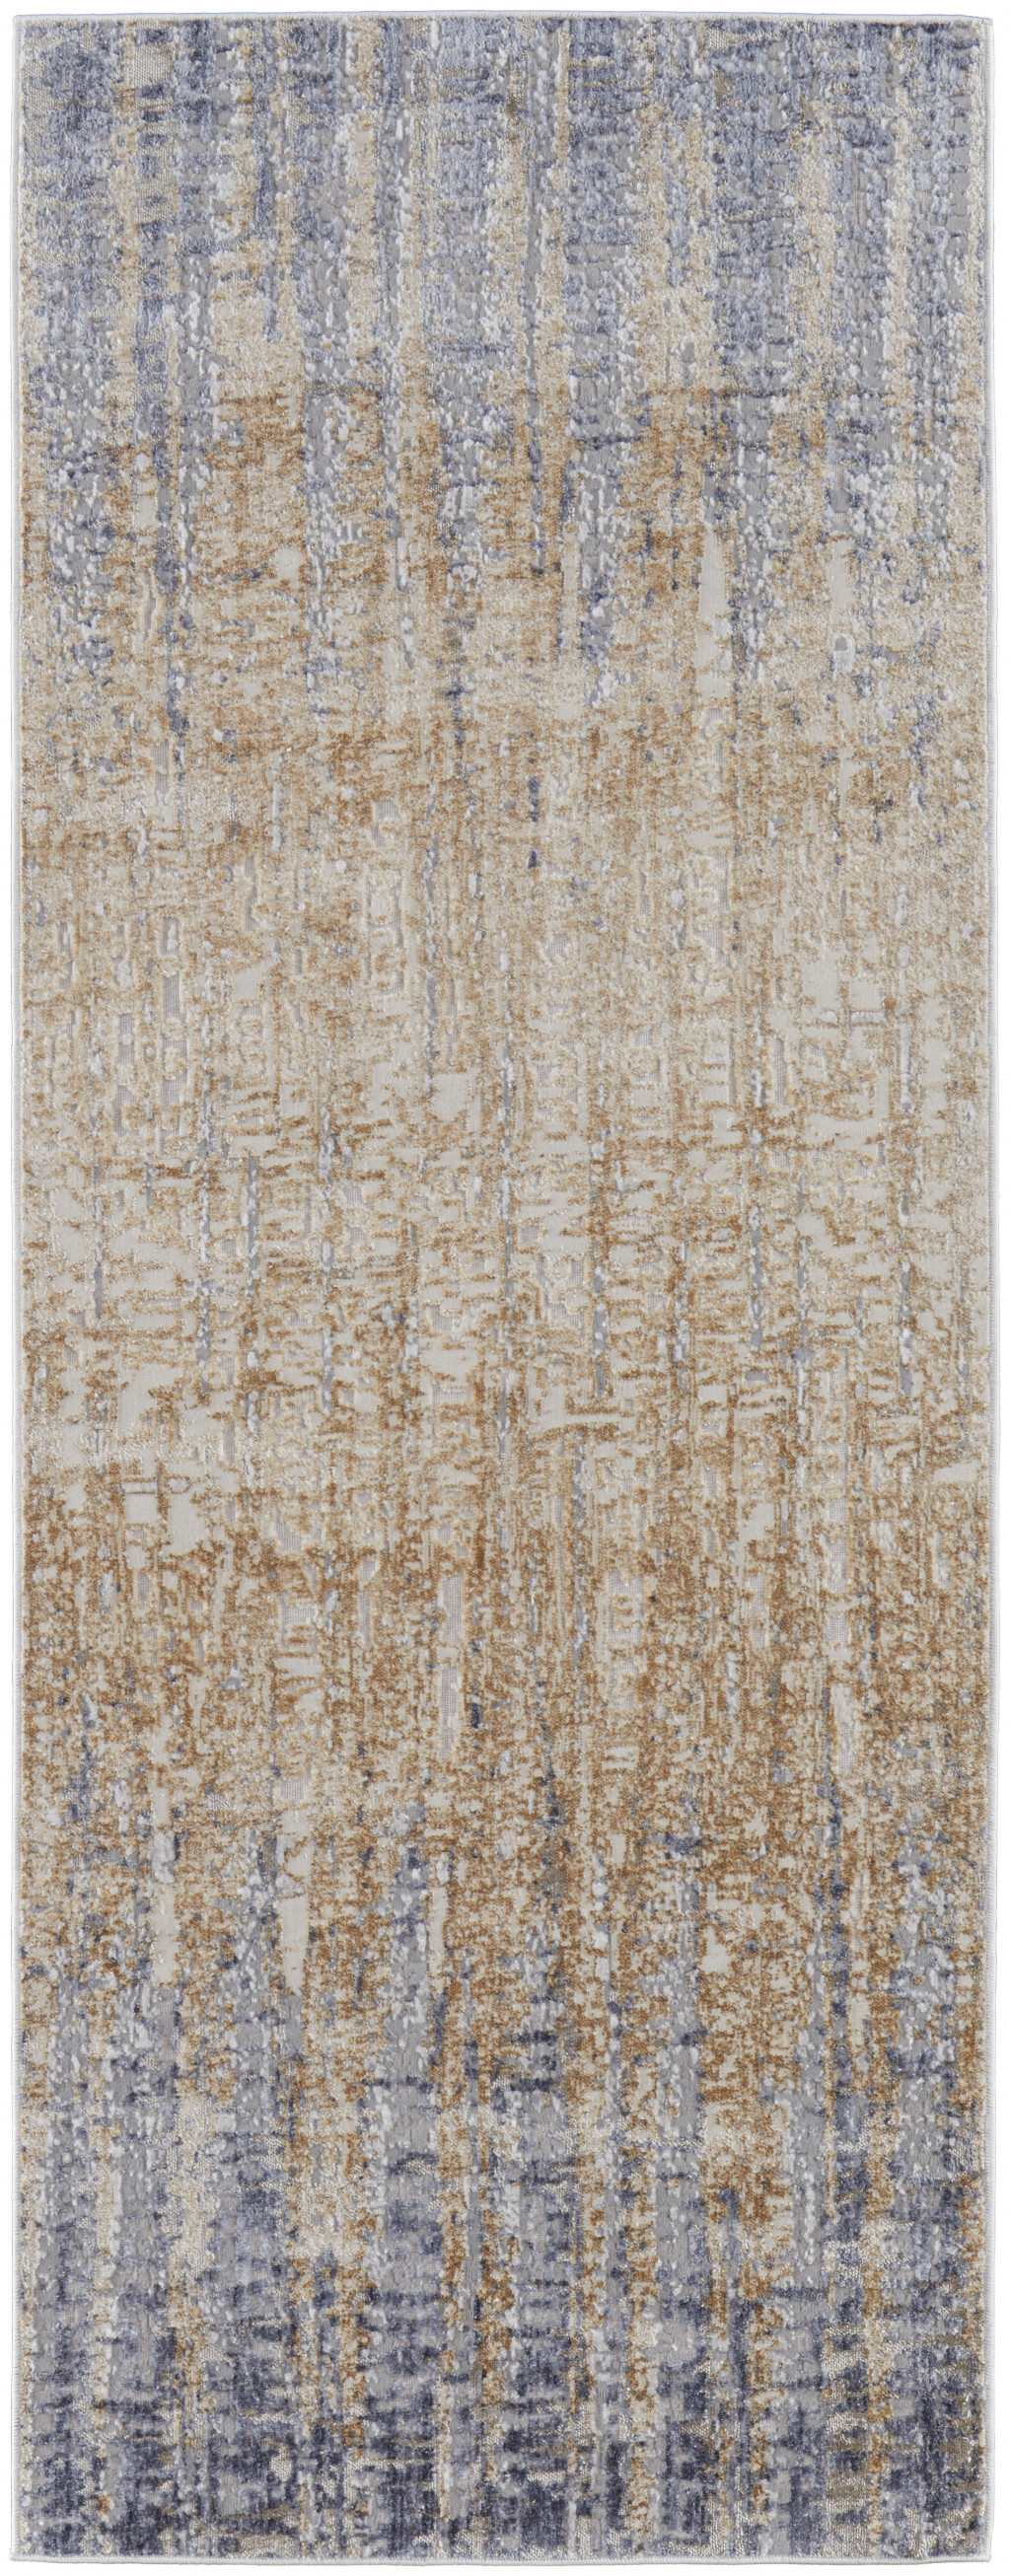 12' Tan Brown And Blue Abstract Power Loom Distressed Runner Rug-514191-1